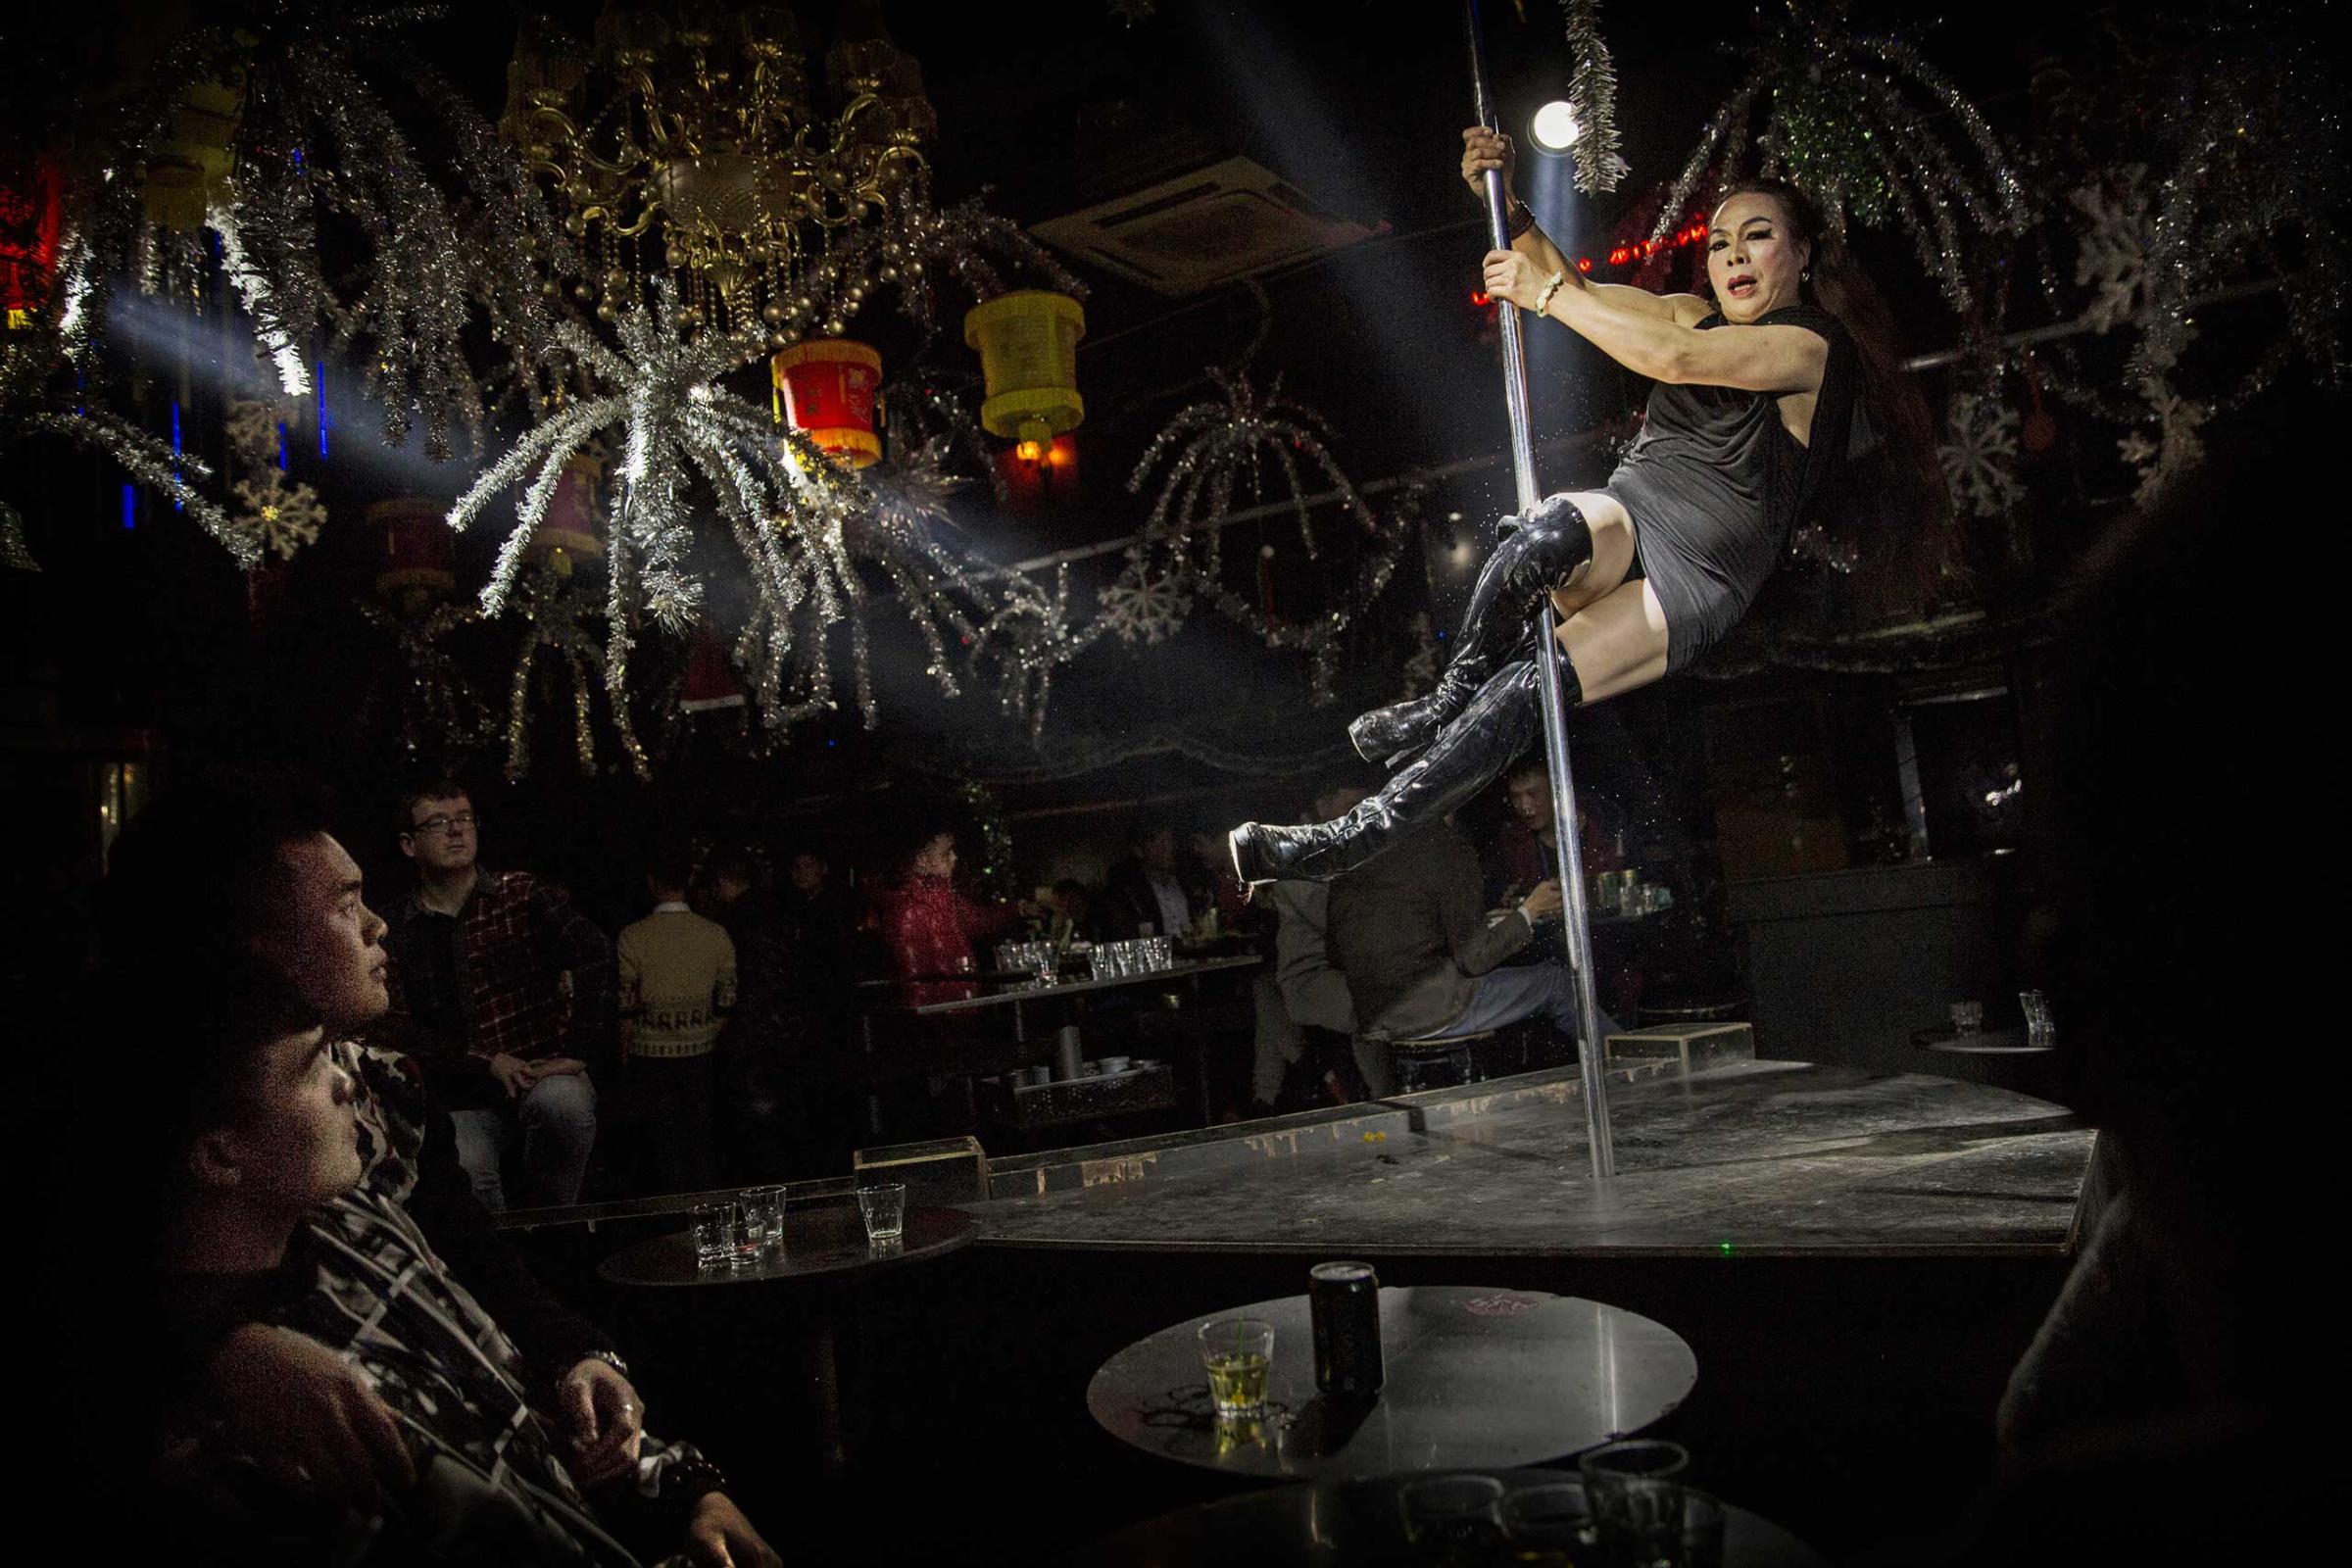 Chinese drag queen who goes by the name Shancun swings on a pole while performing a routine for customers at the Chunai 98 club in Nanning, Guangxi Province, southern China, on Jan. 10, 2015.